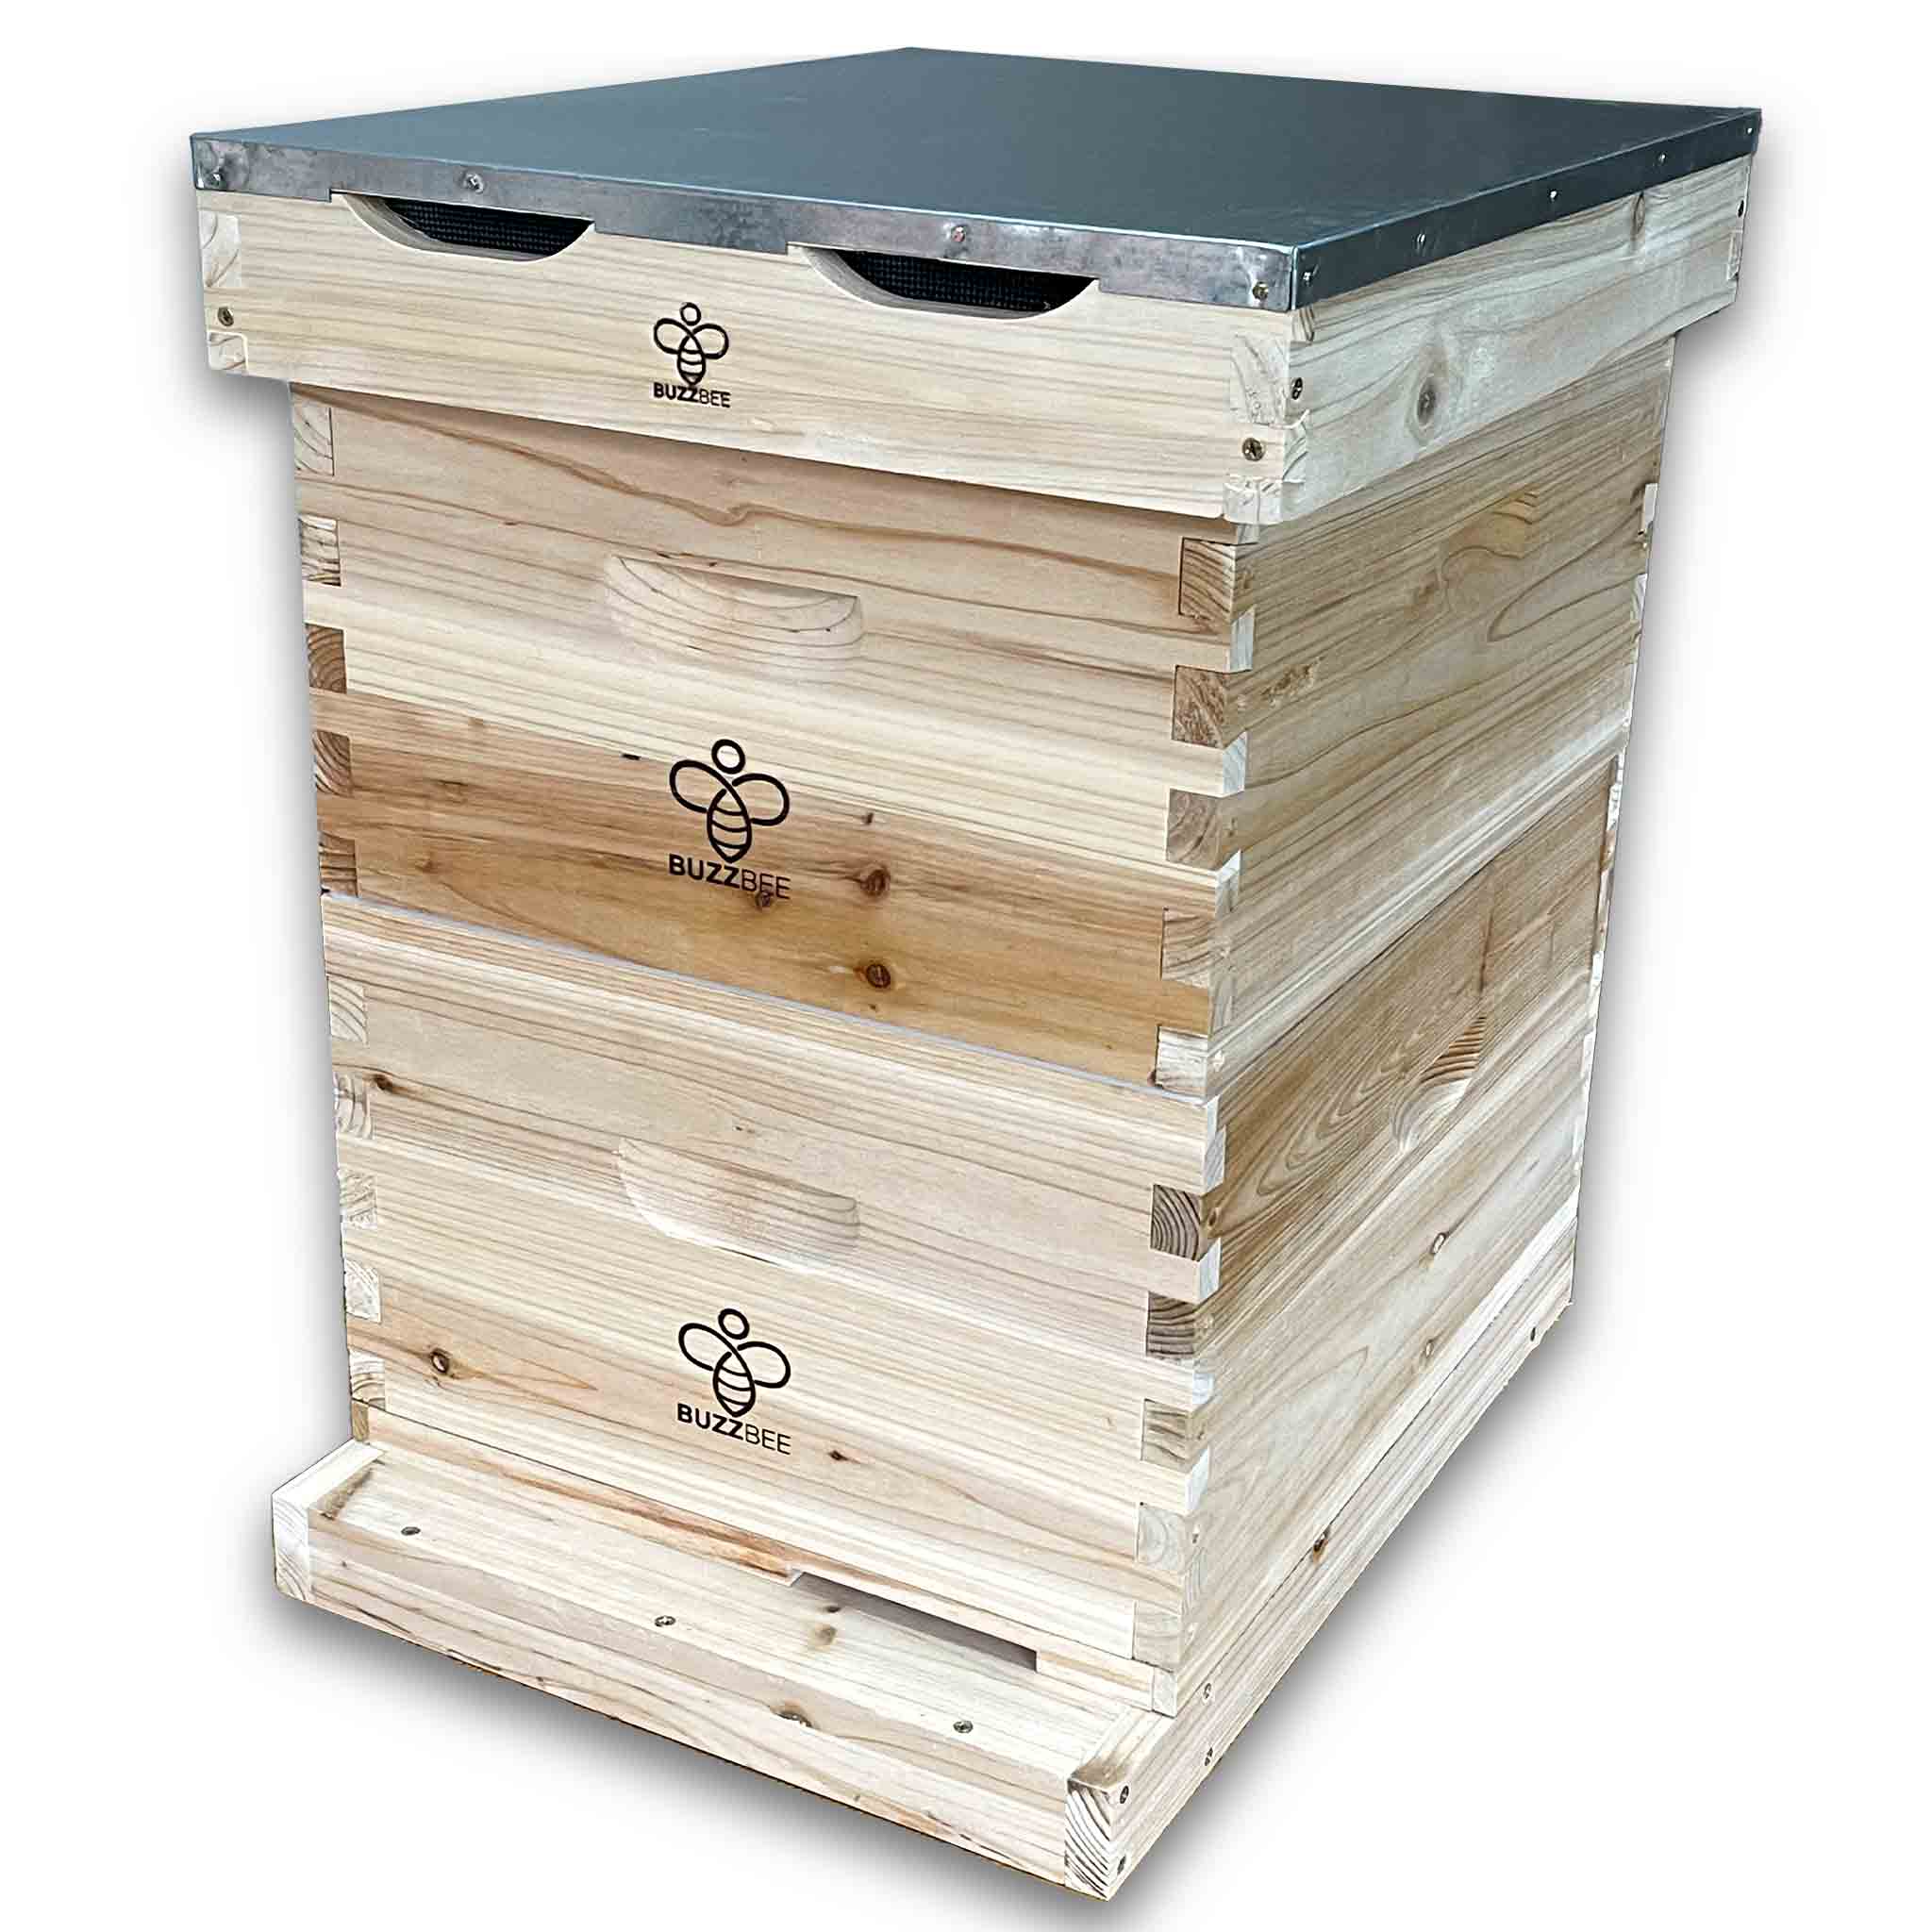 Langstroth 8 and 10 Frame Double Full Depth Super Box Beehive from Buzzbee Beekeeping